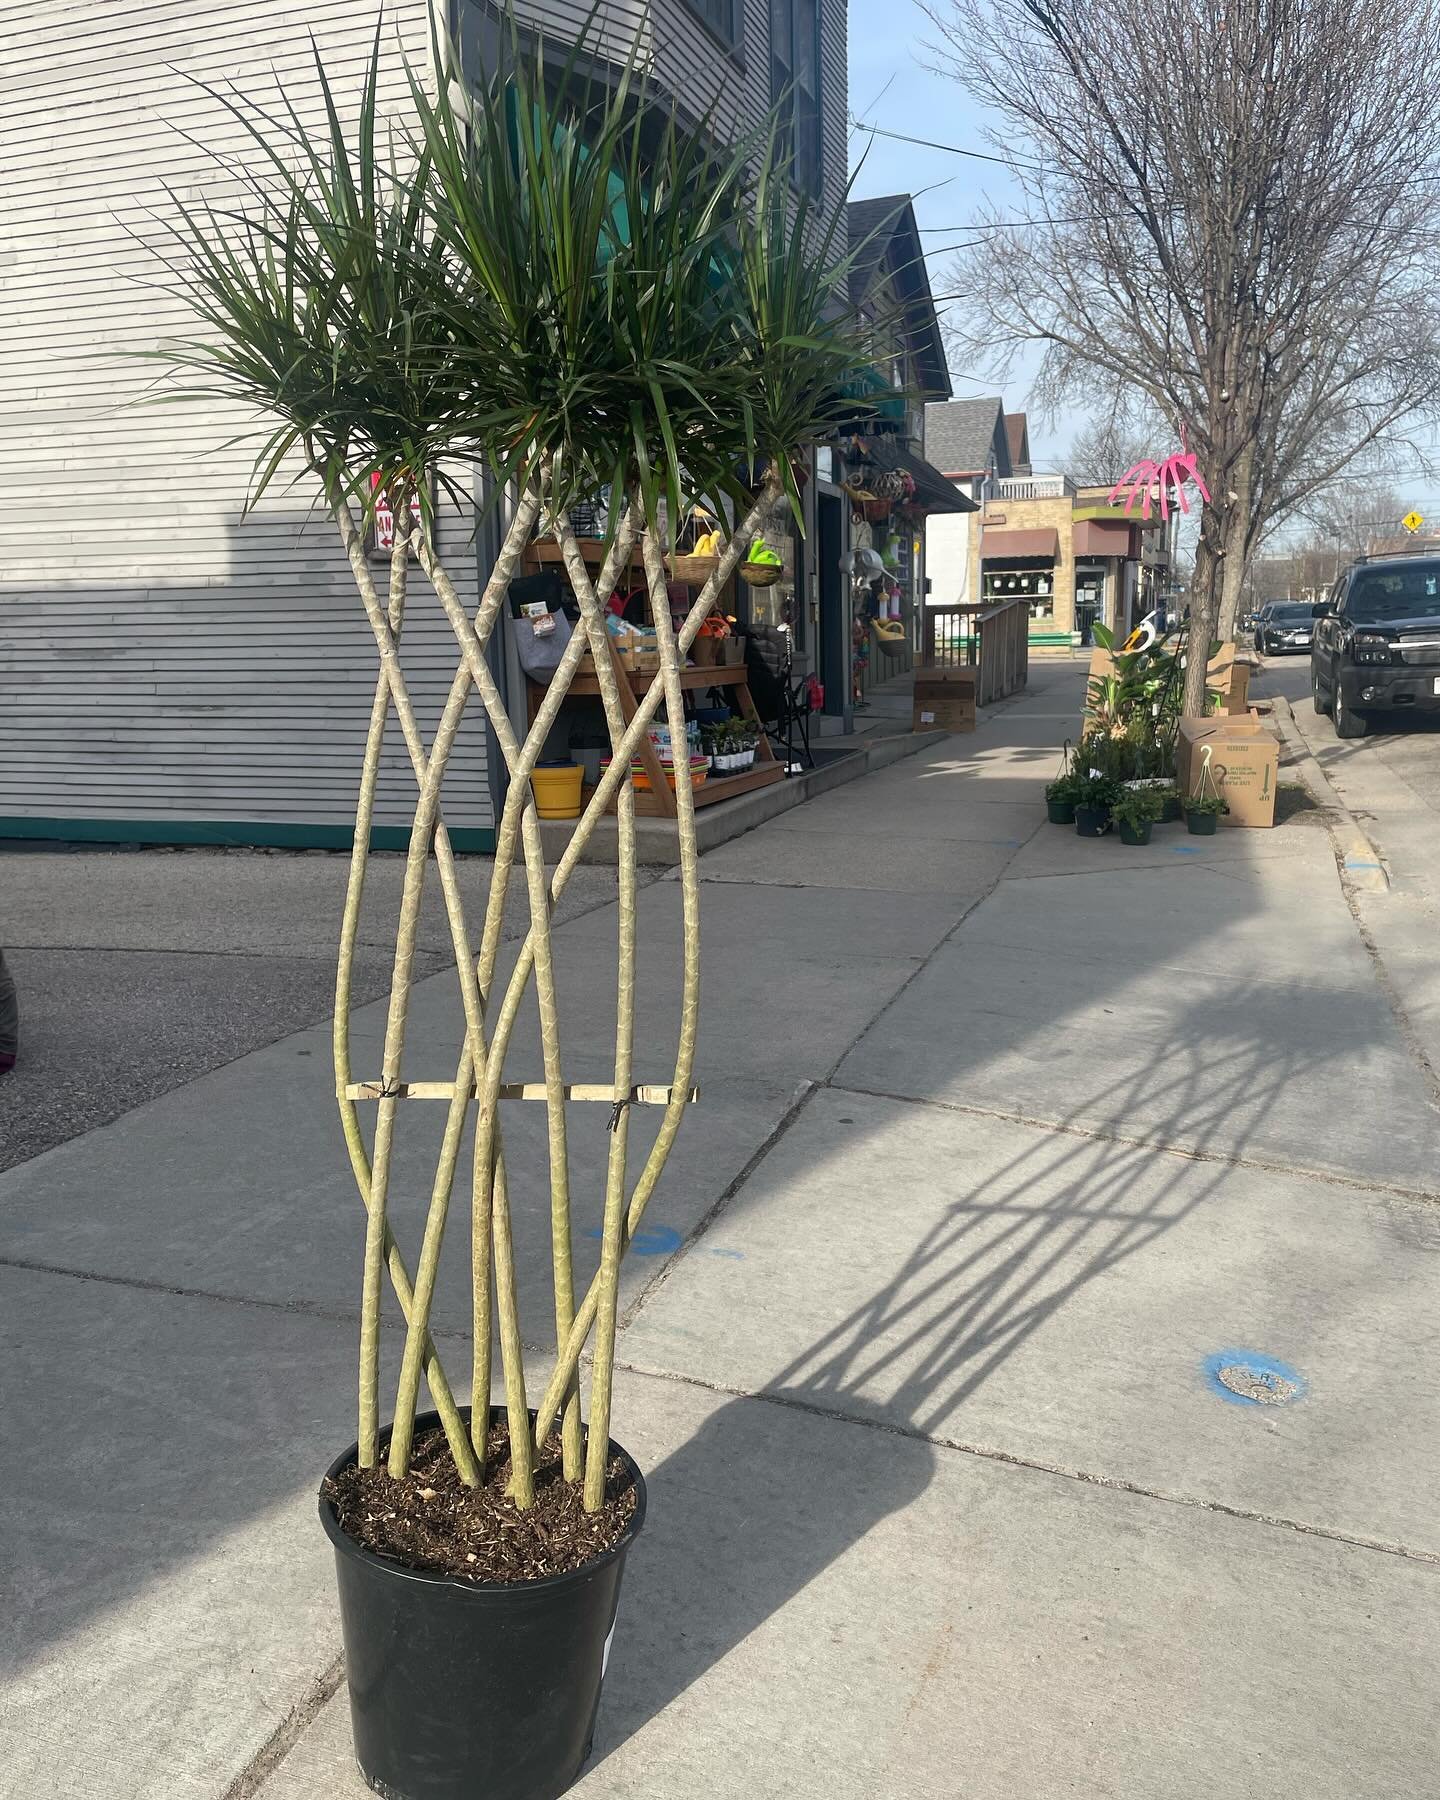 Here are some sidewalk glamour shots of some of the larger new plants that we just received from Florida. These specimens make particularly nice shadows! #plantsmakepeoplehappy #sunshinemakesmehappy #shadowart #willystreet #madisonwi